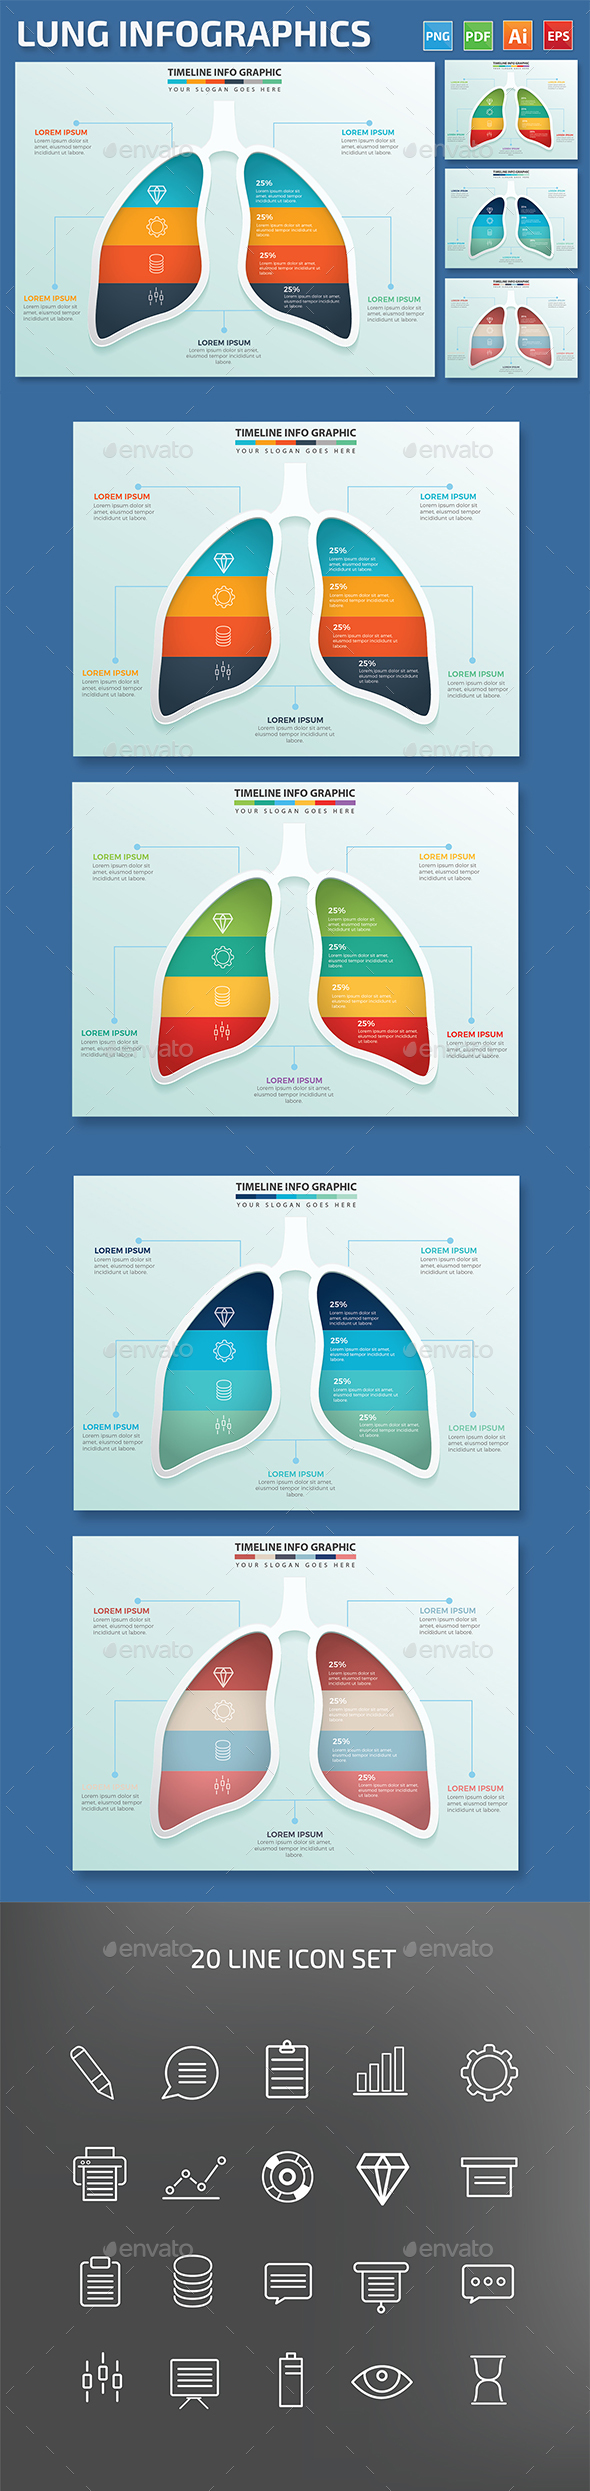 [DOWNLOAD]Lung Infographics design